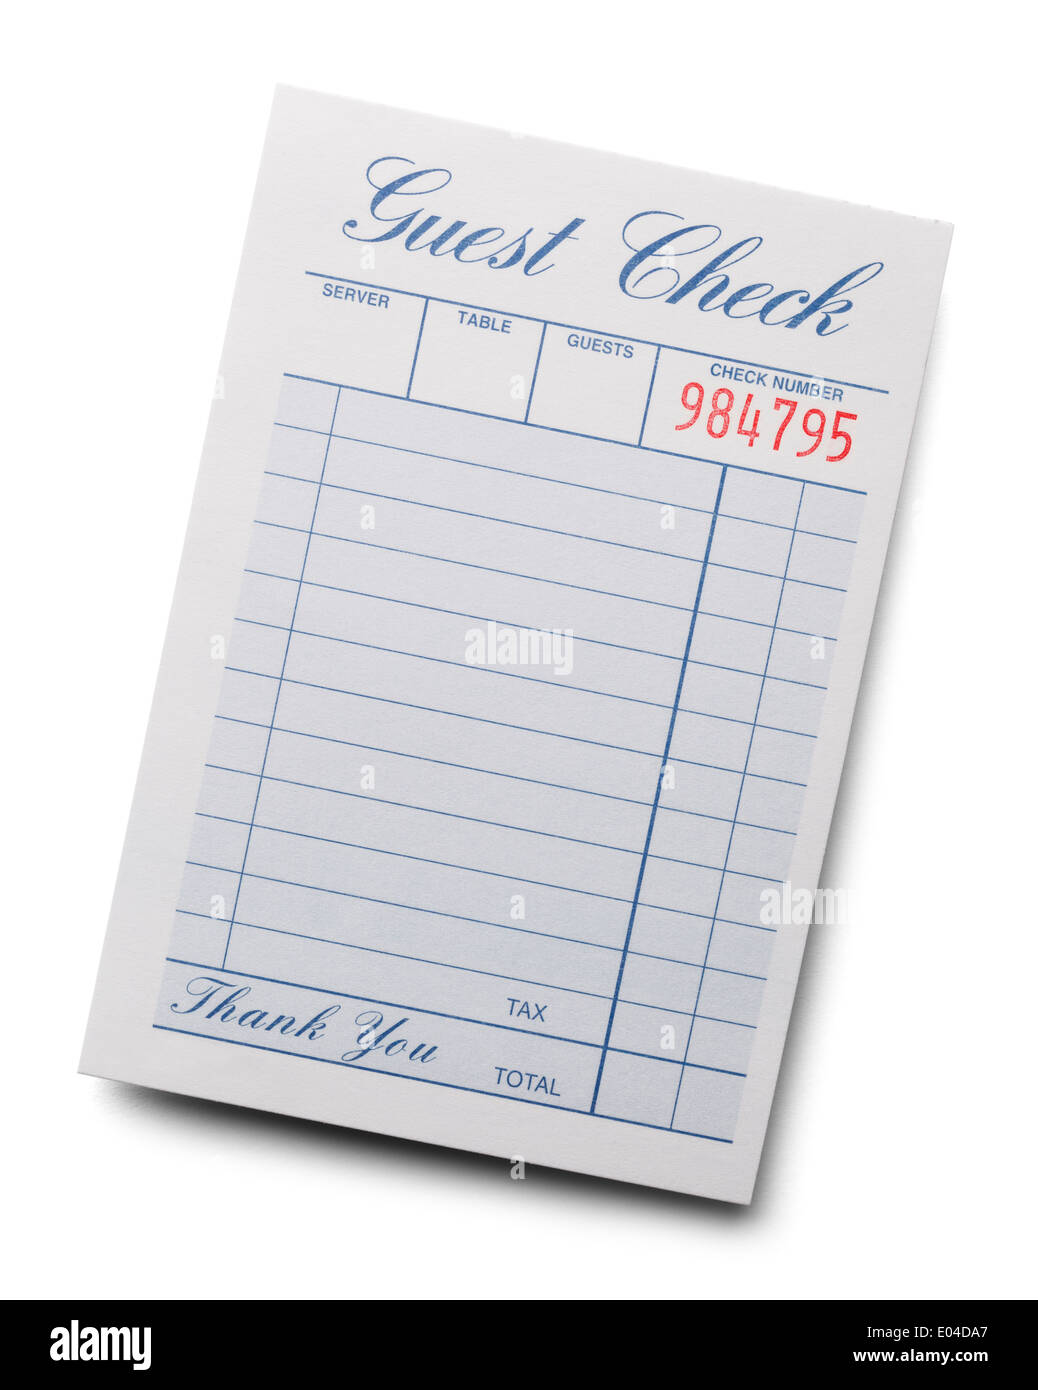 Blue and White Resturant Receipt Check Isolated on a White Background. Stock Photo